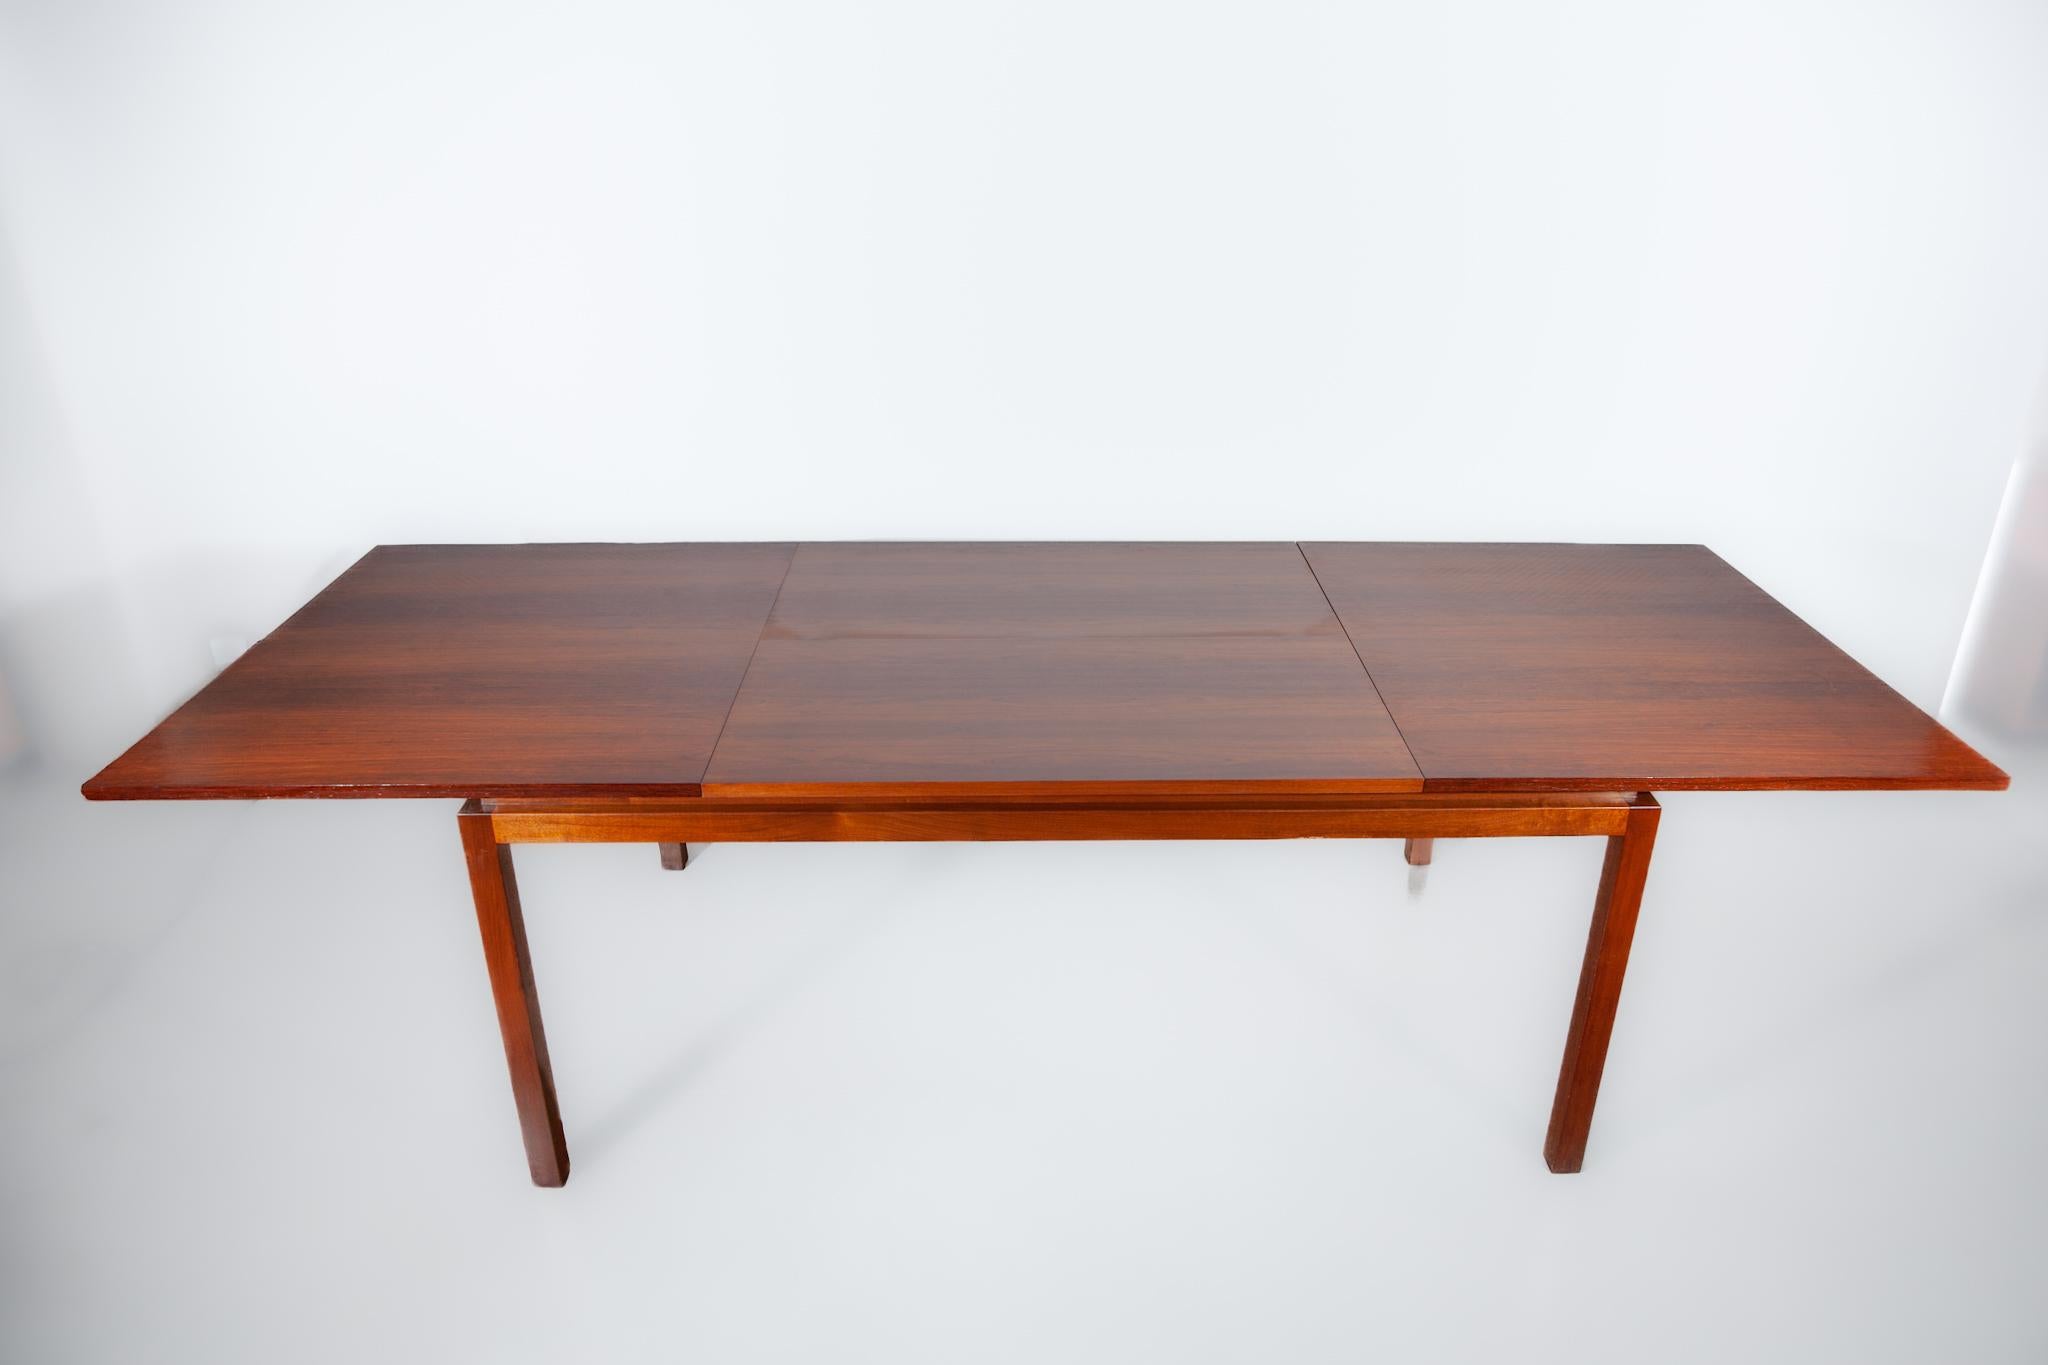 Wood Diningroom Set Table and Six Chairs by Alfred Hendrickx 1960s for Belform